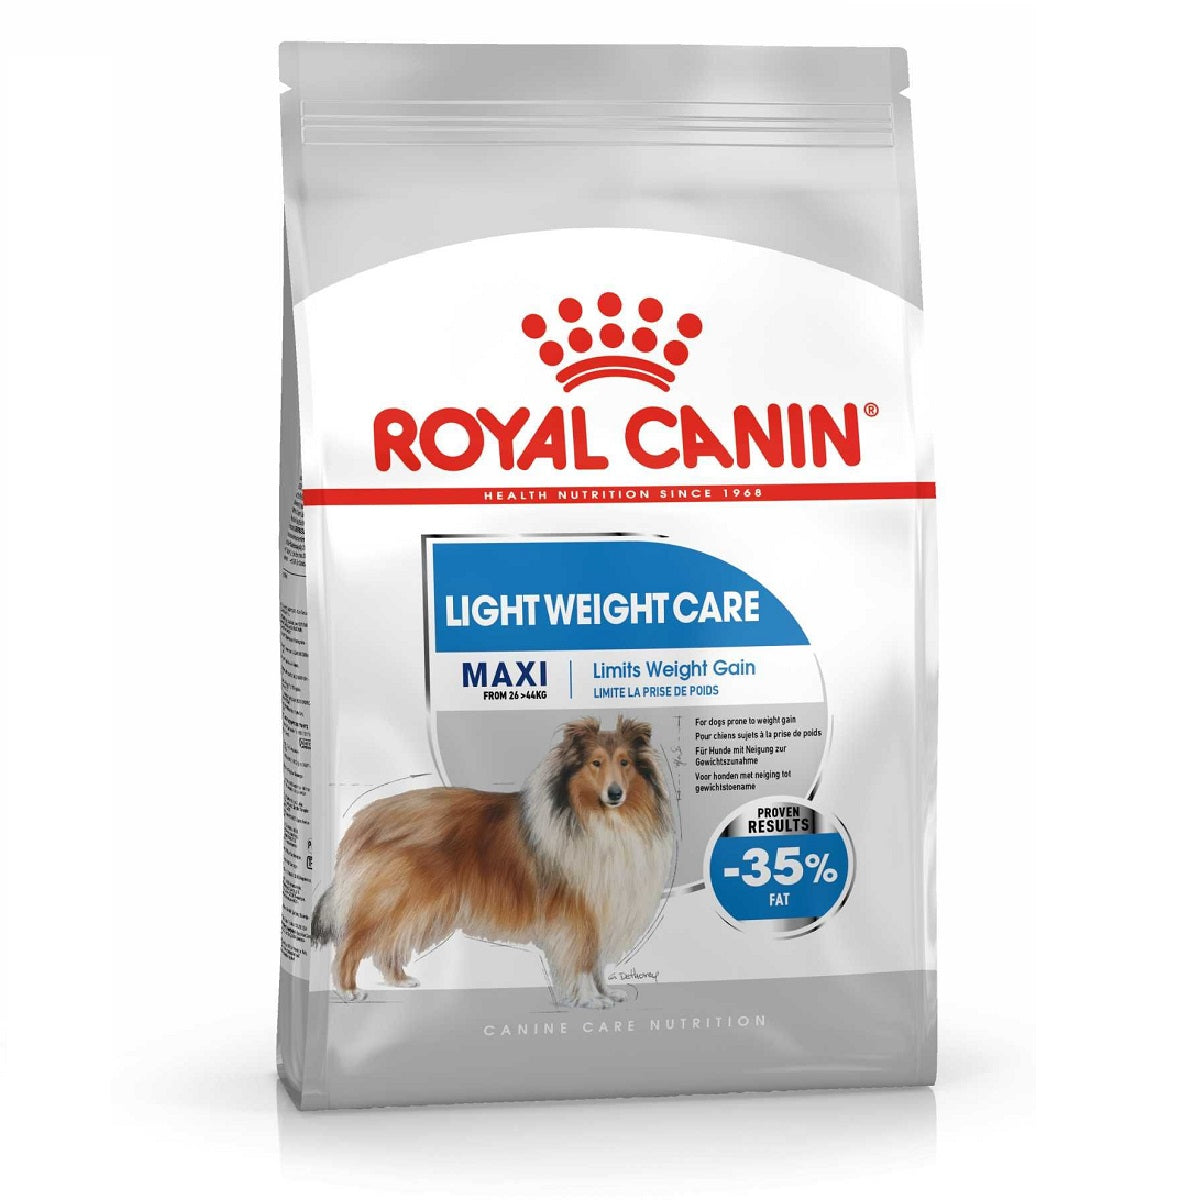 ROYAL CANIN - Maxi Light Weight Care (12kg)